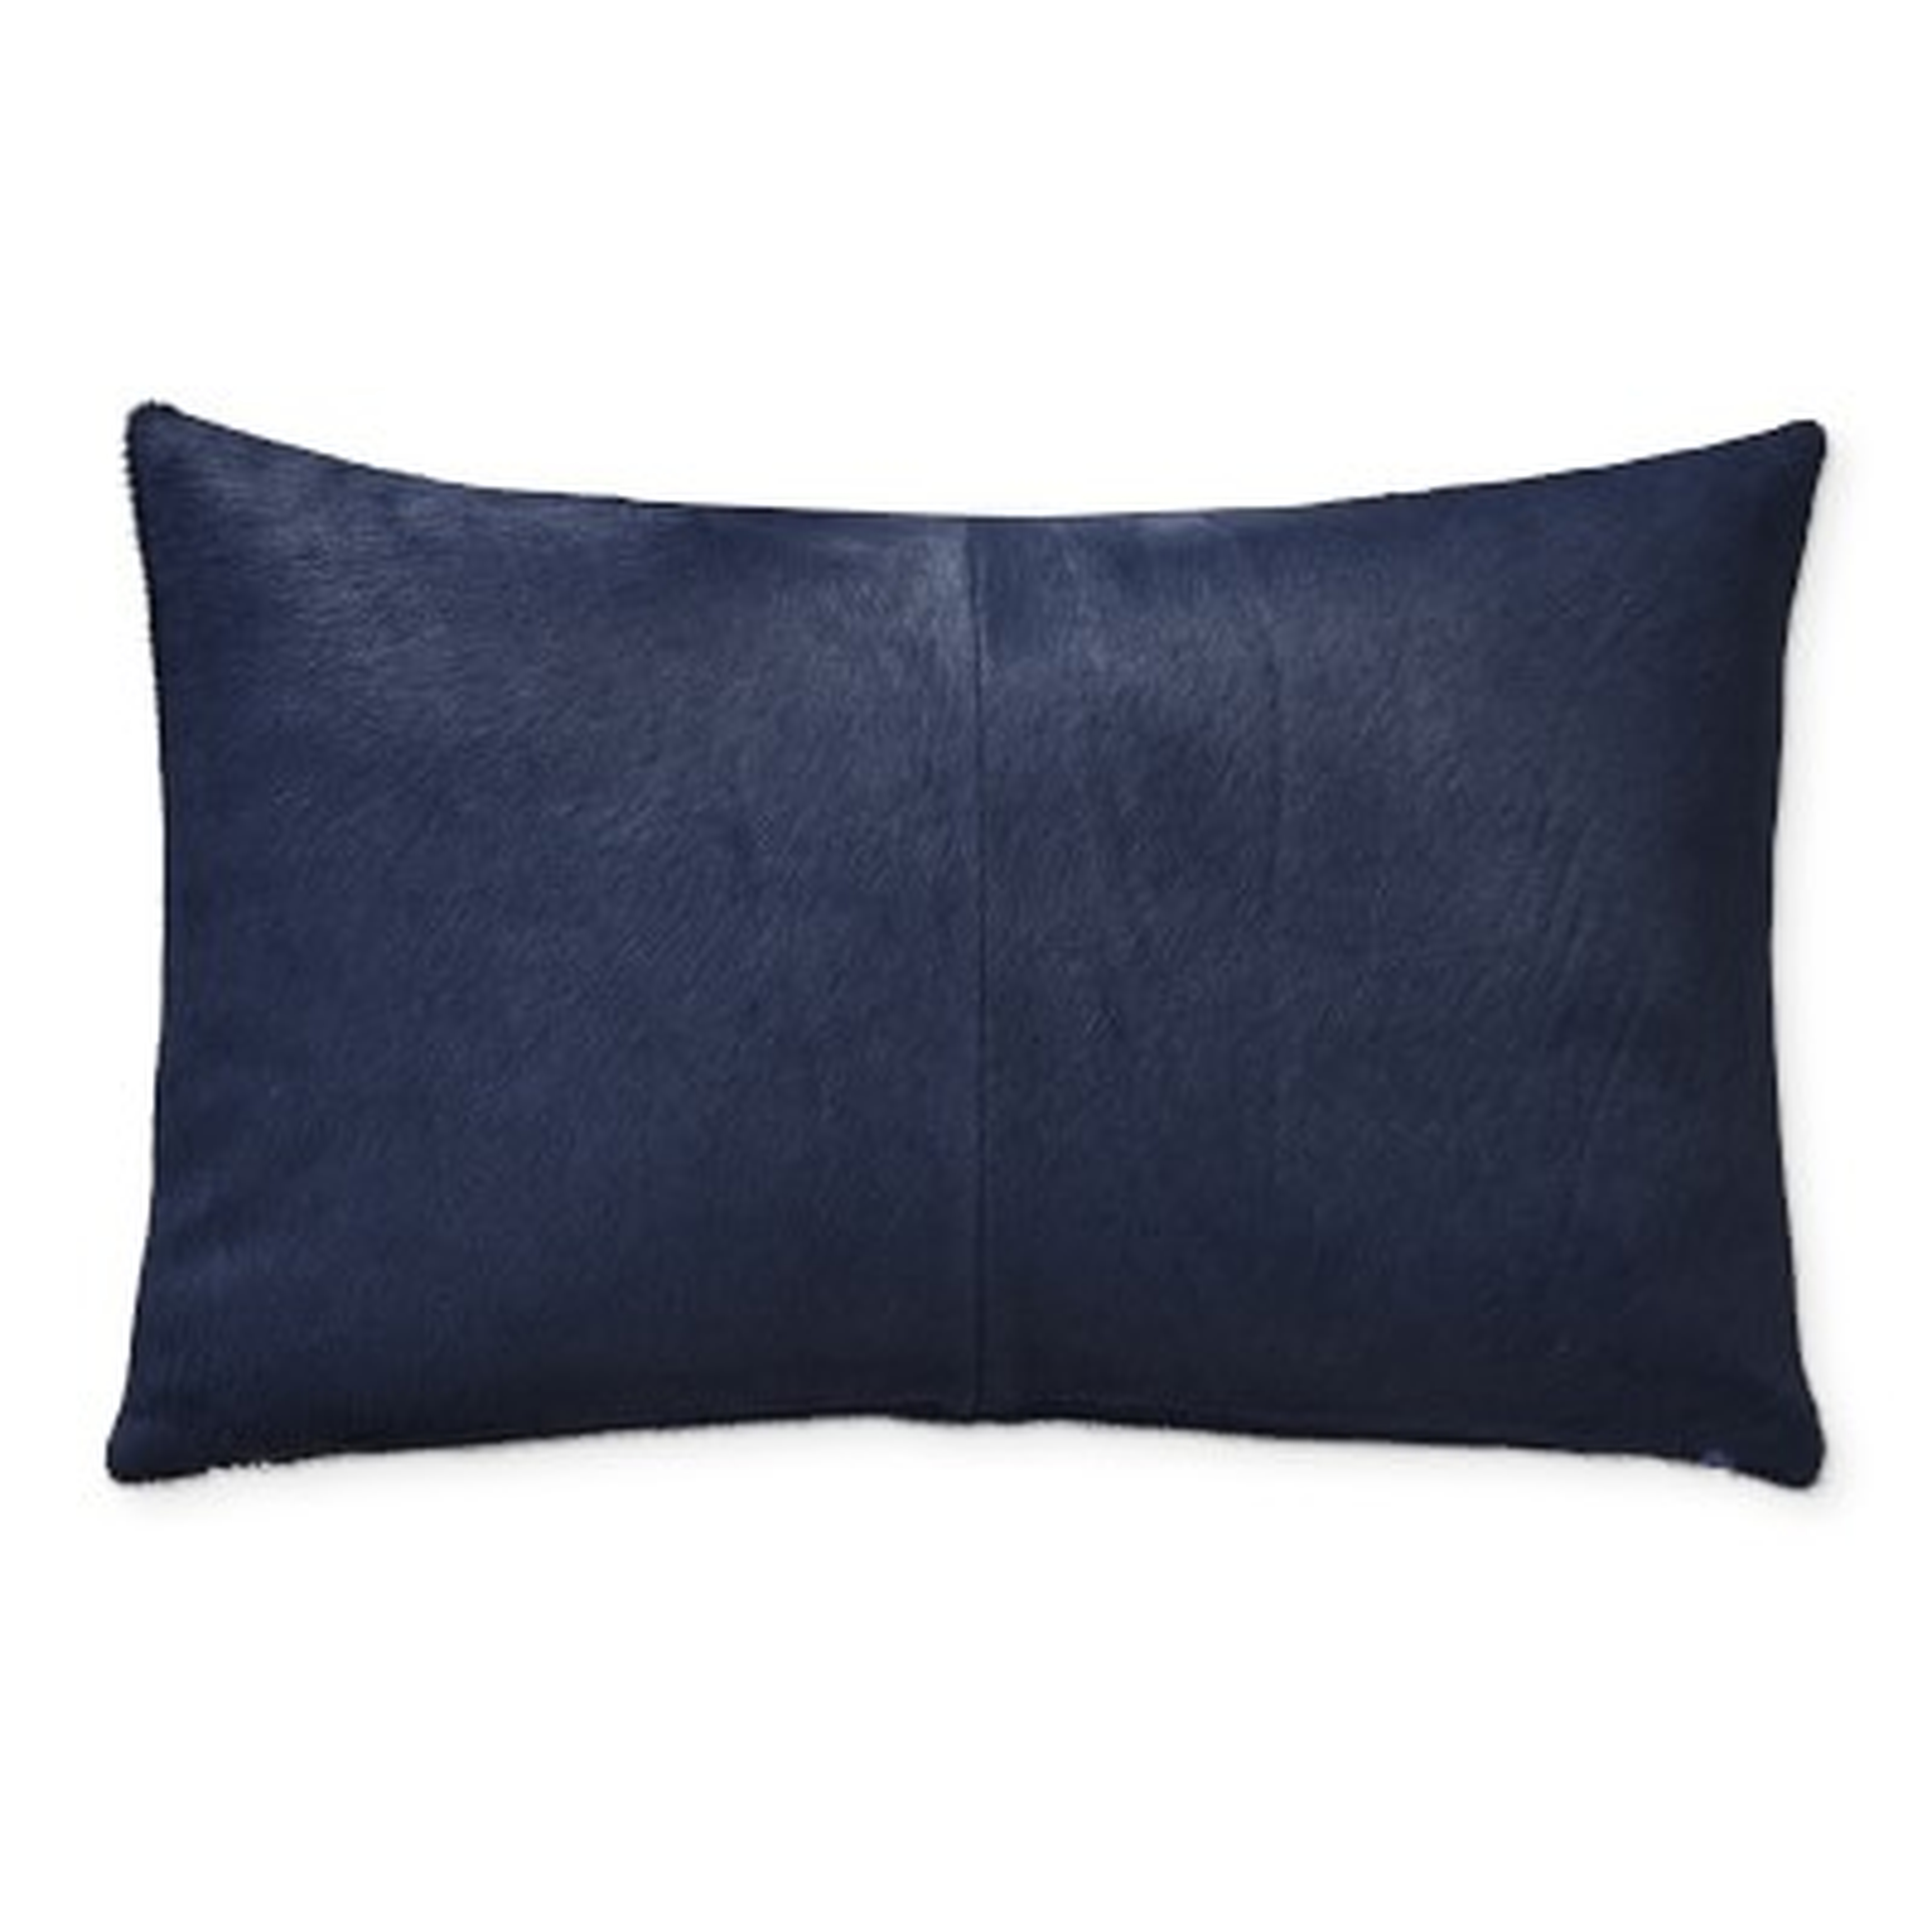 Solid Hide Pillow Cover, 14" X 22", Navy - Williams Sonoma